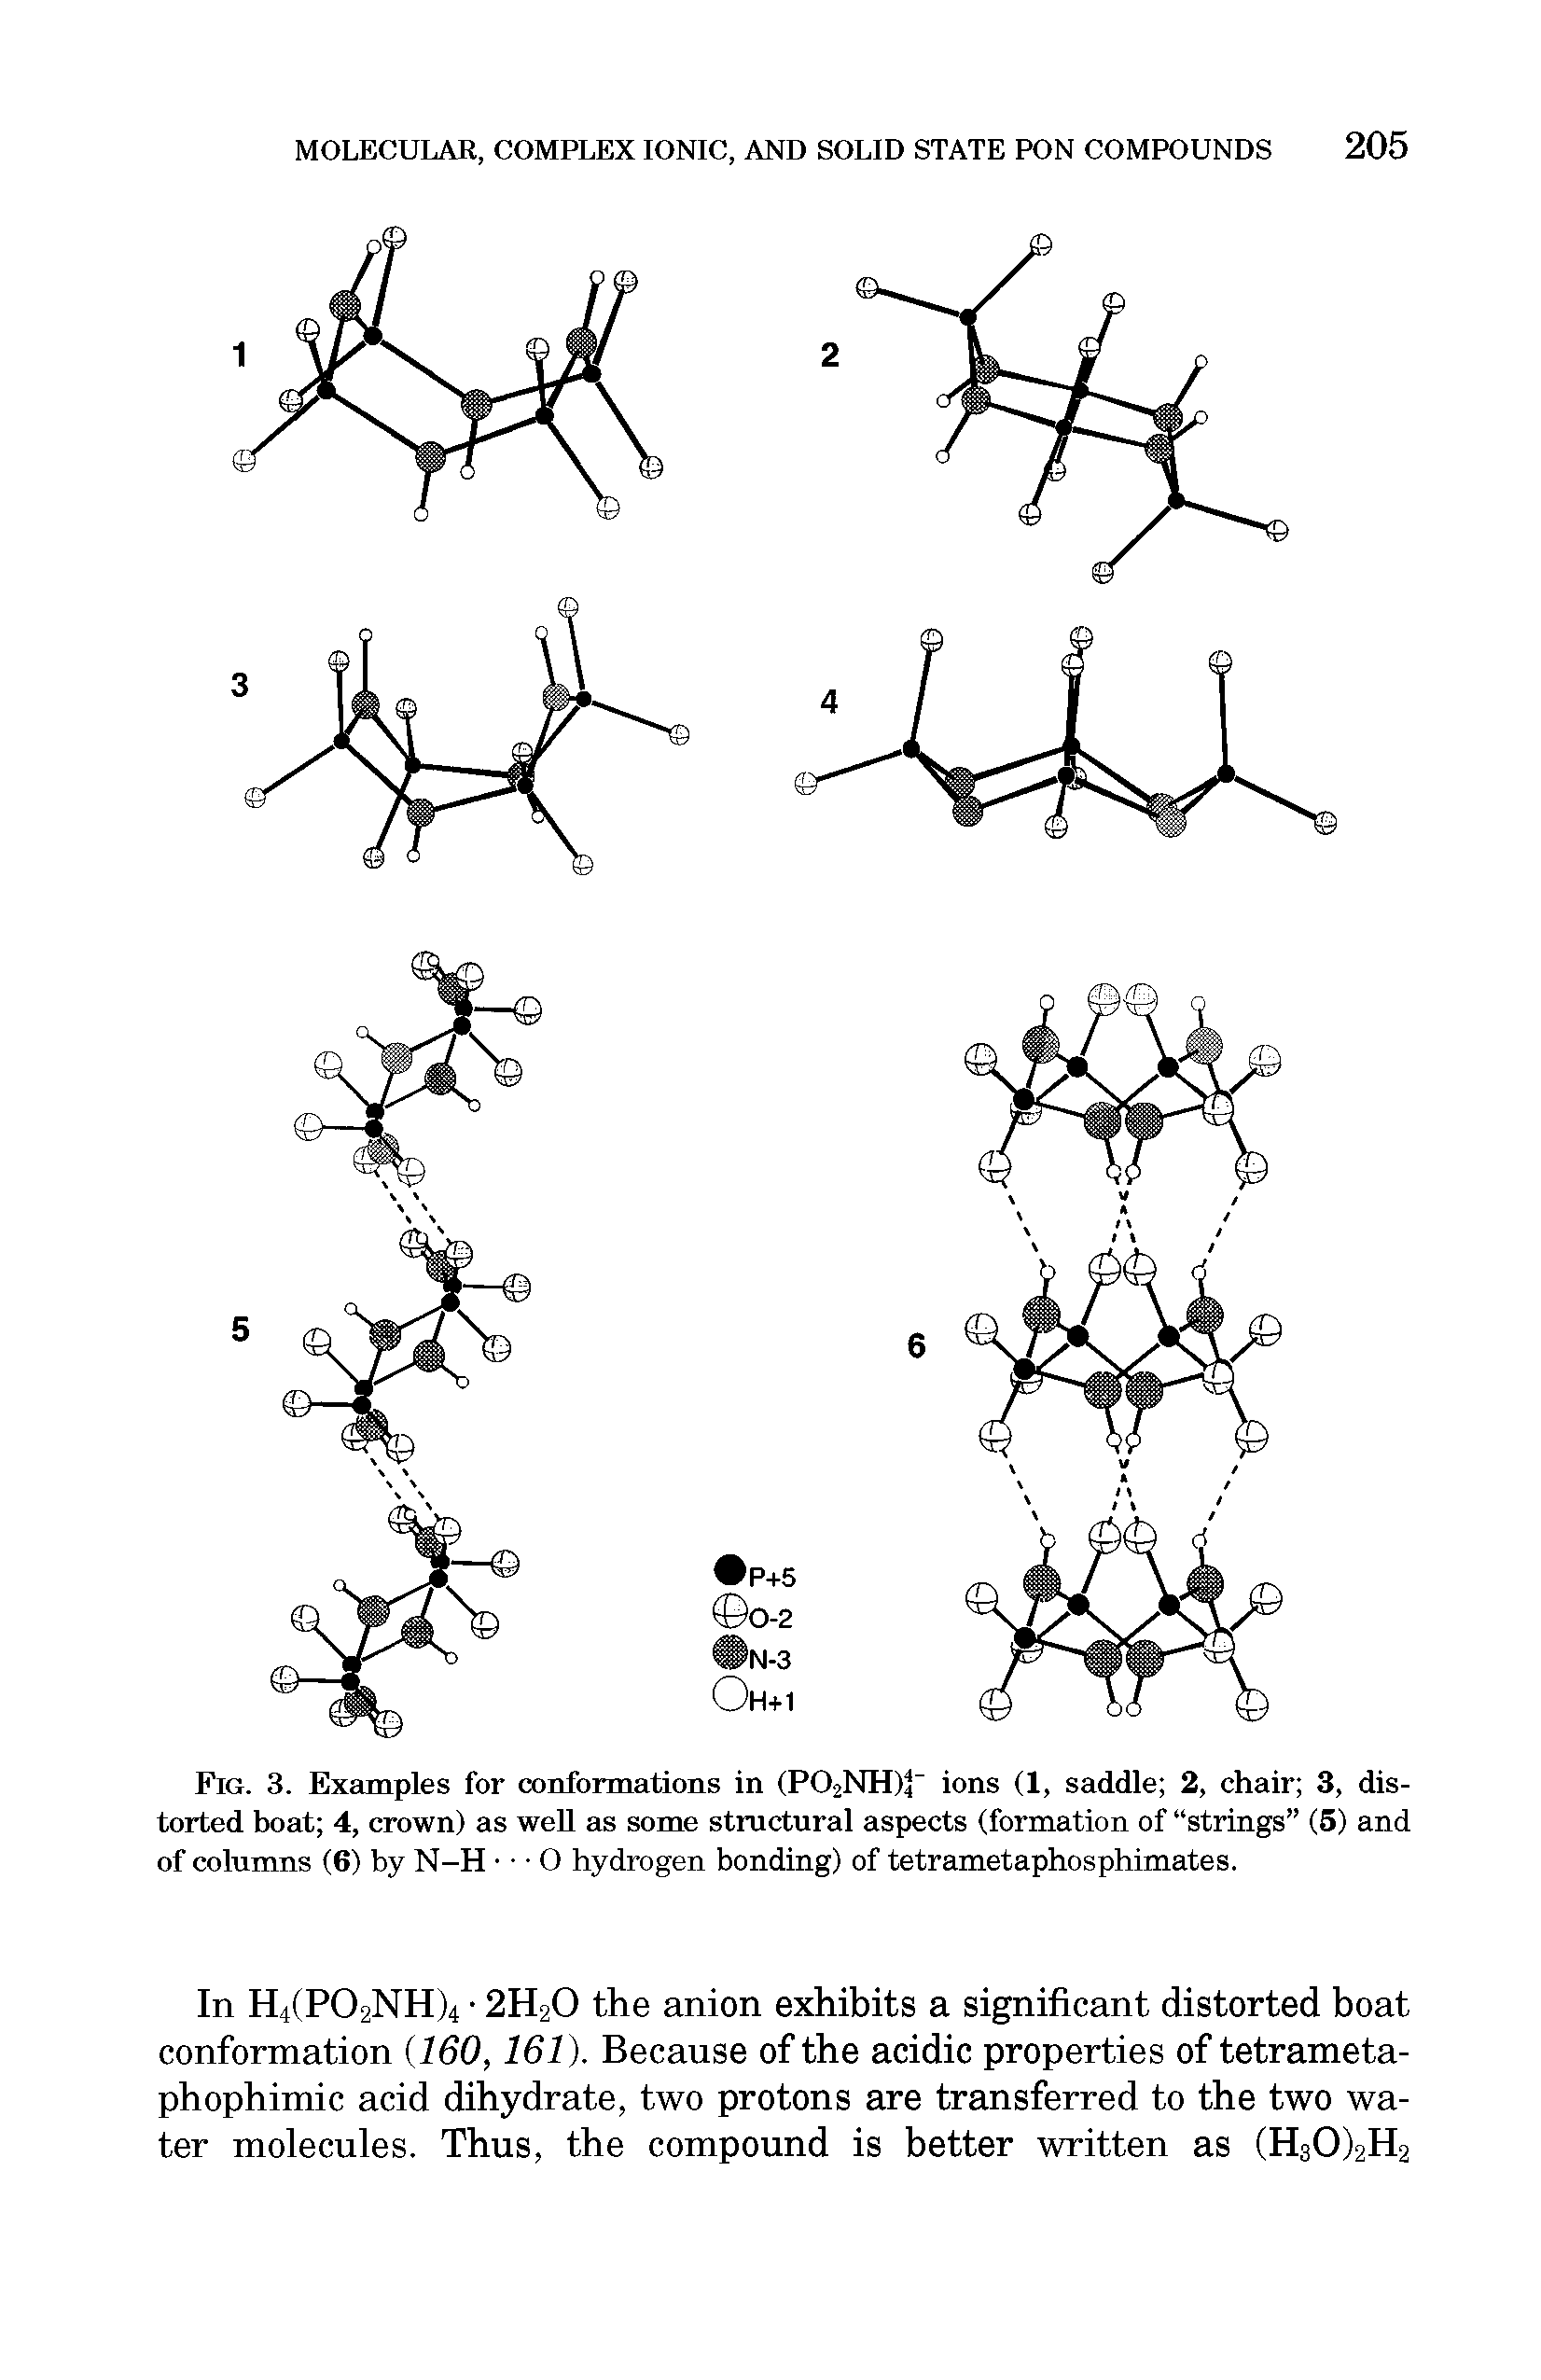 Fig. 3. Examples for conformations in (P02NH)f ions (1, saddle 2, chair 3, distorted boat 4, crown) as well as some structural aspects (formation of strings (5) and of columns (6) by N-H O hydrogen bonding) of tetrametaphosphimates.